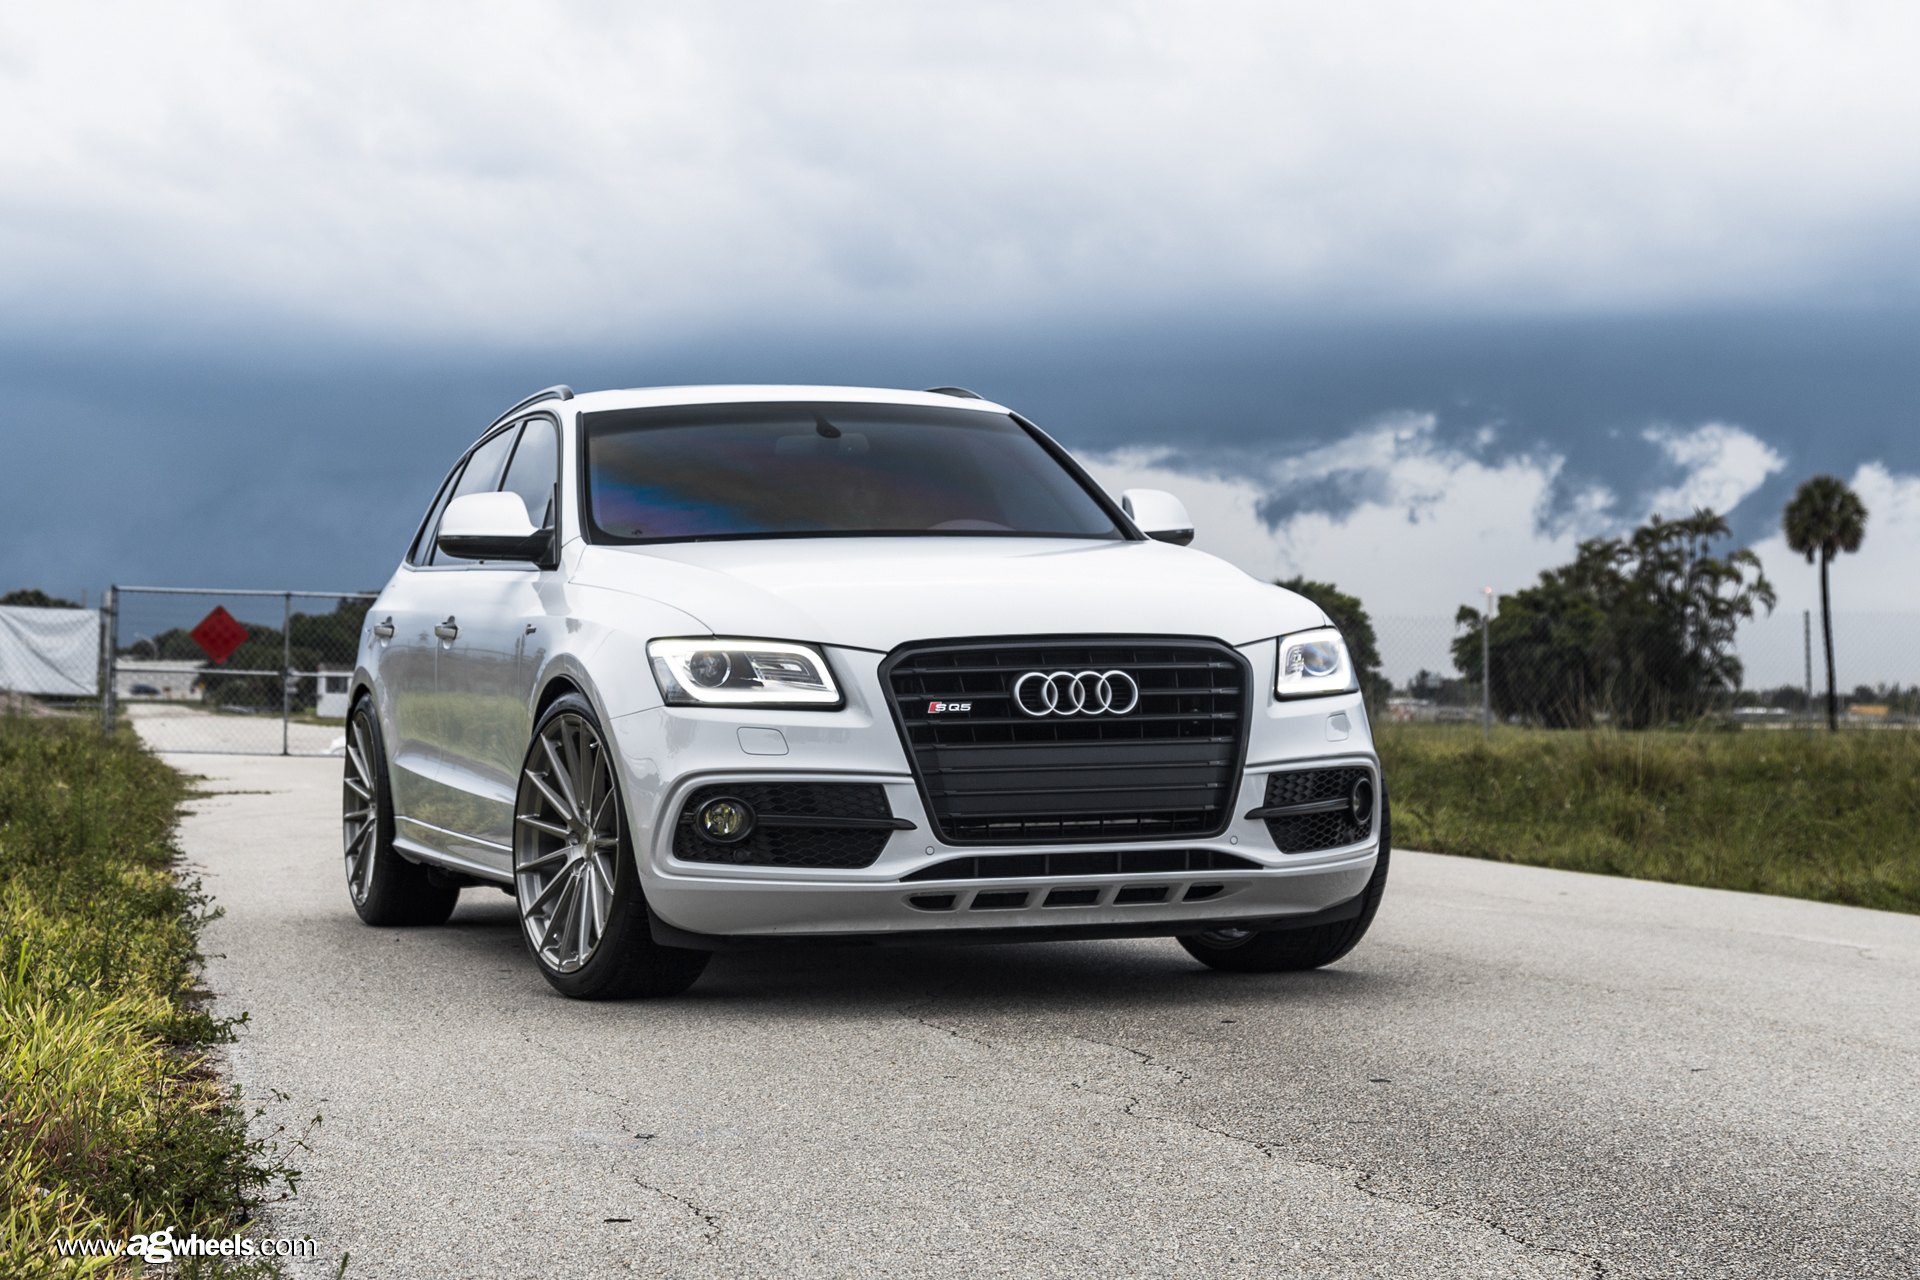 Front Bumper with Fog Lights on White Audi Q5 - Photo by Avant Garde Wheels